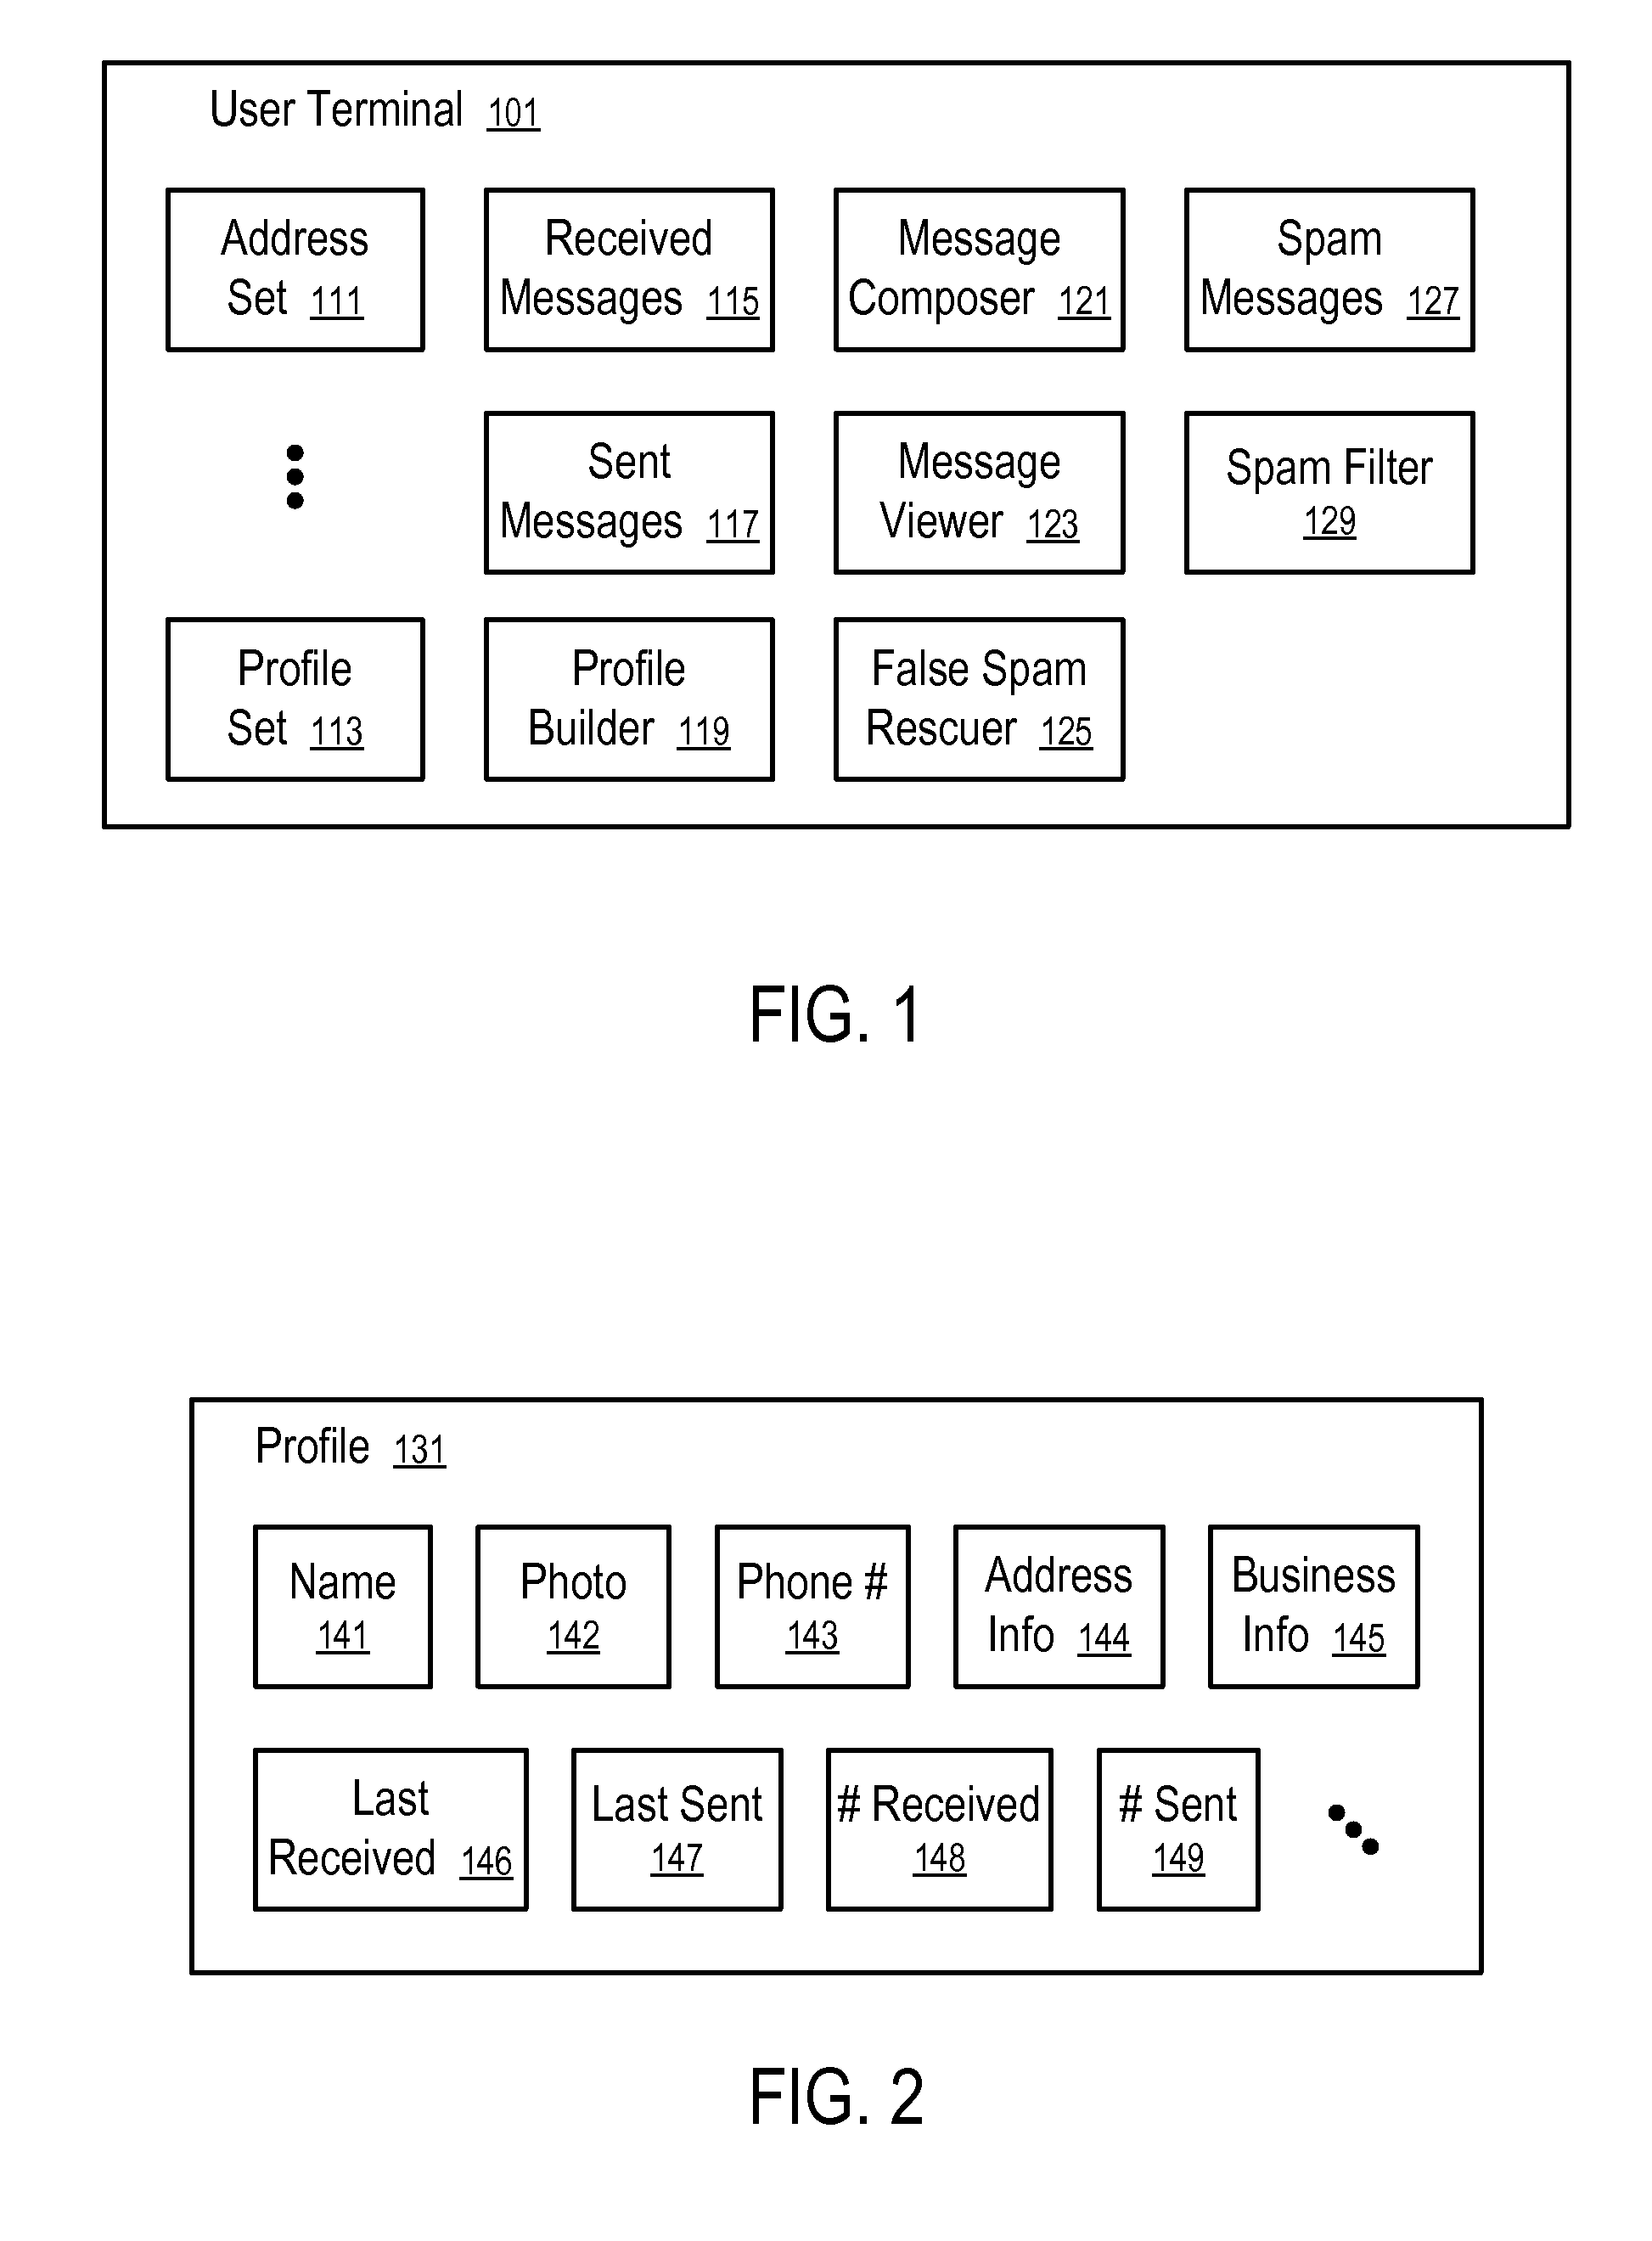 Systems and Methods for Spam Filtering